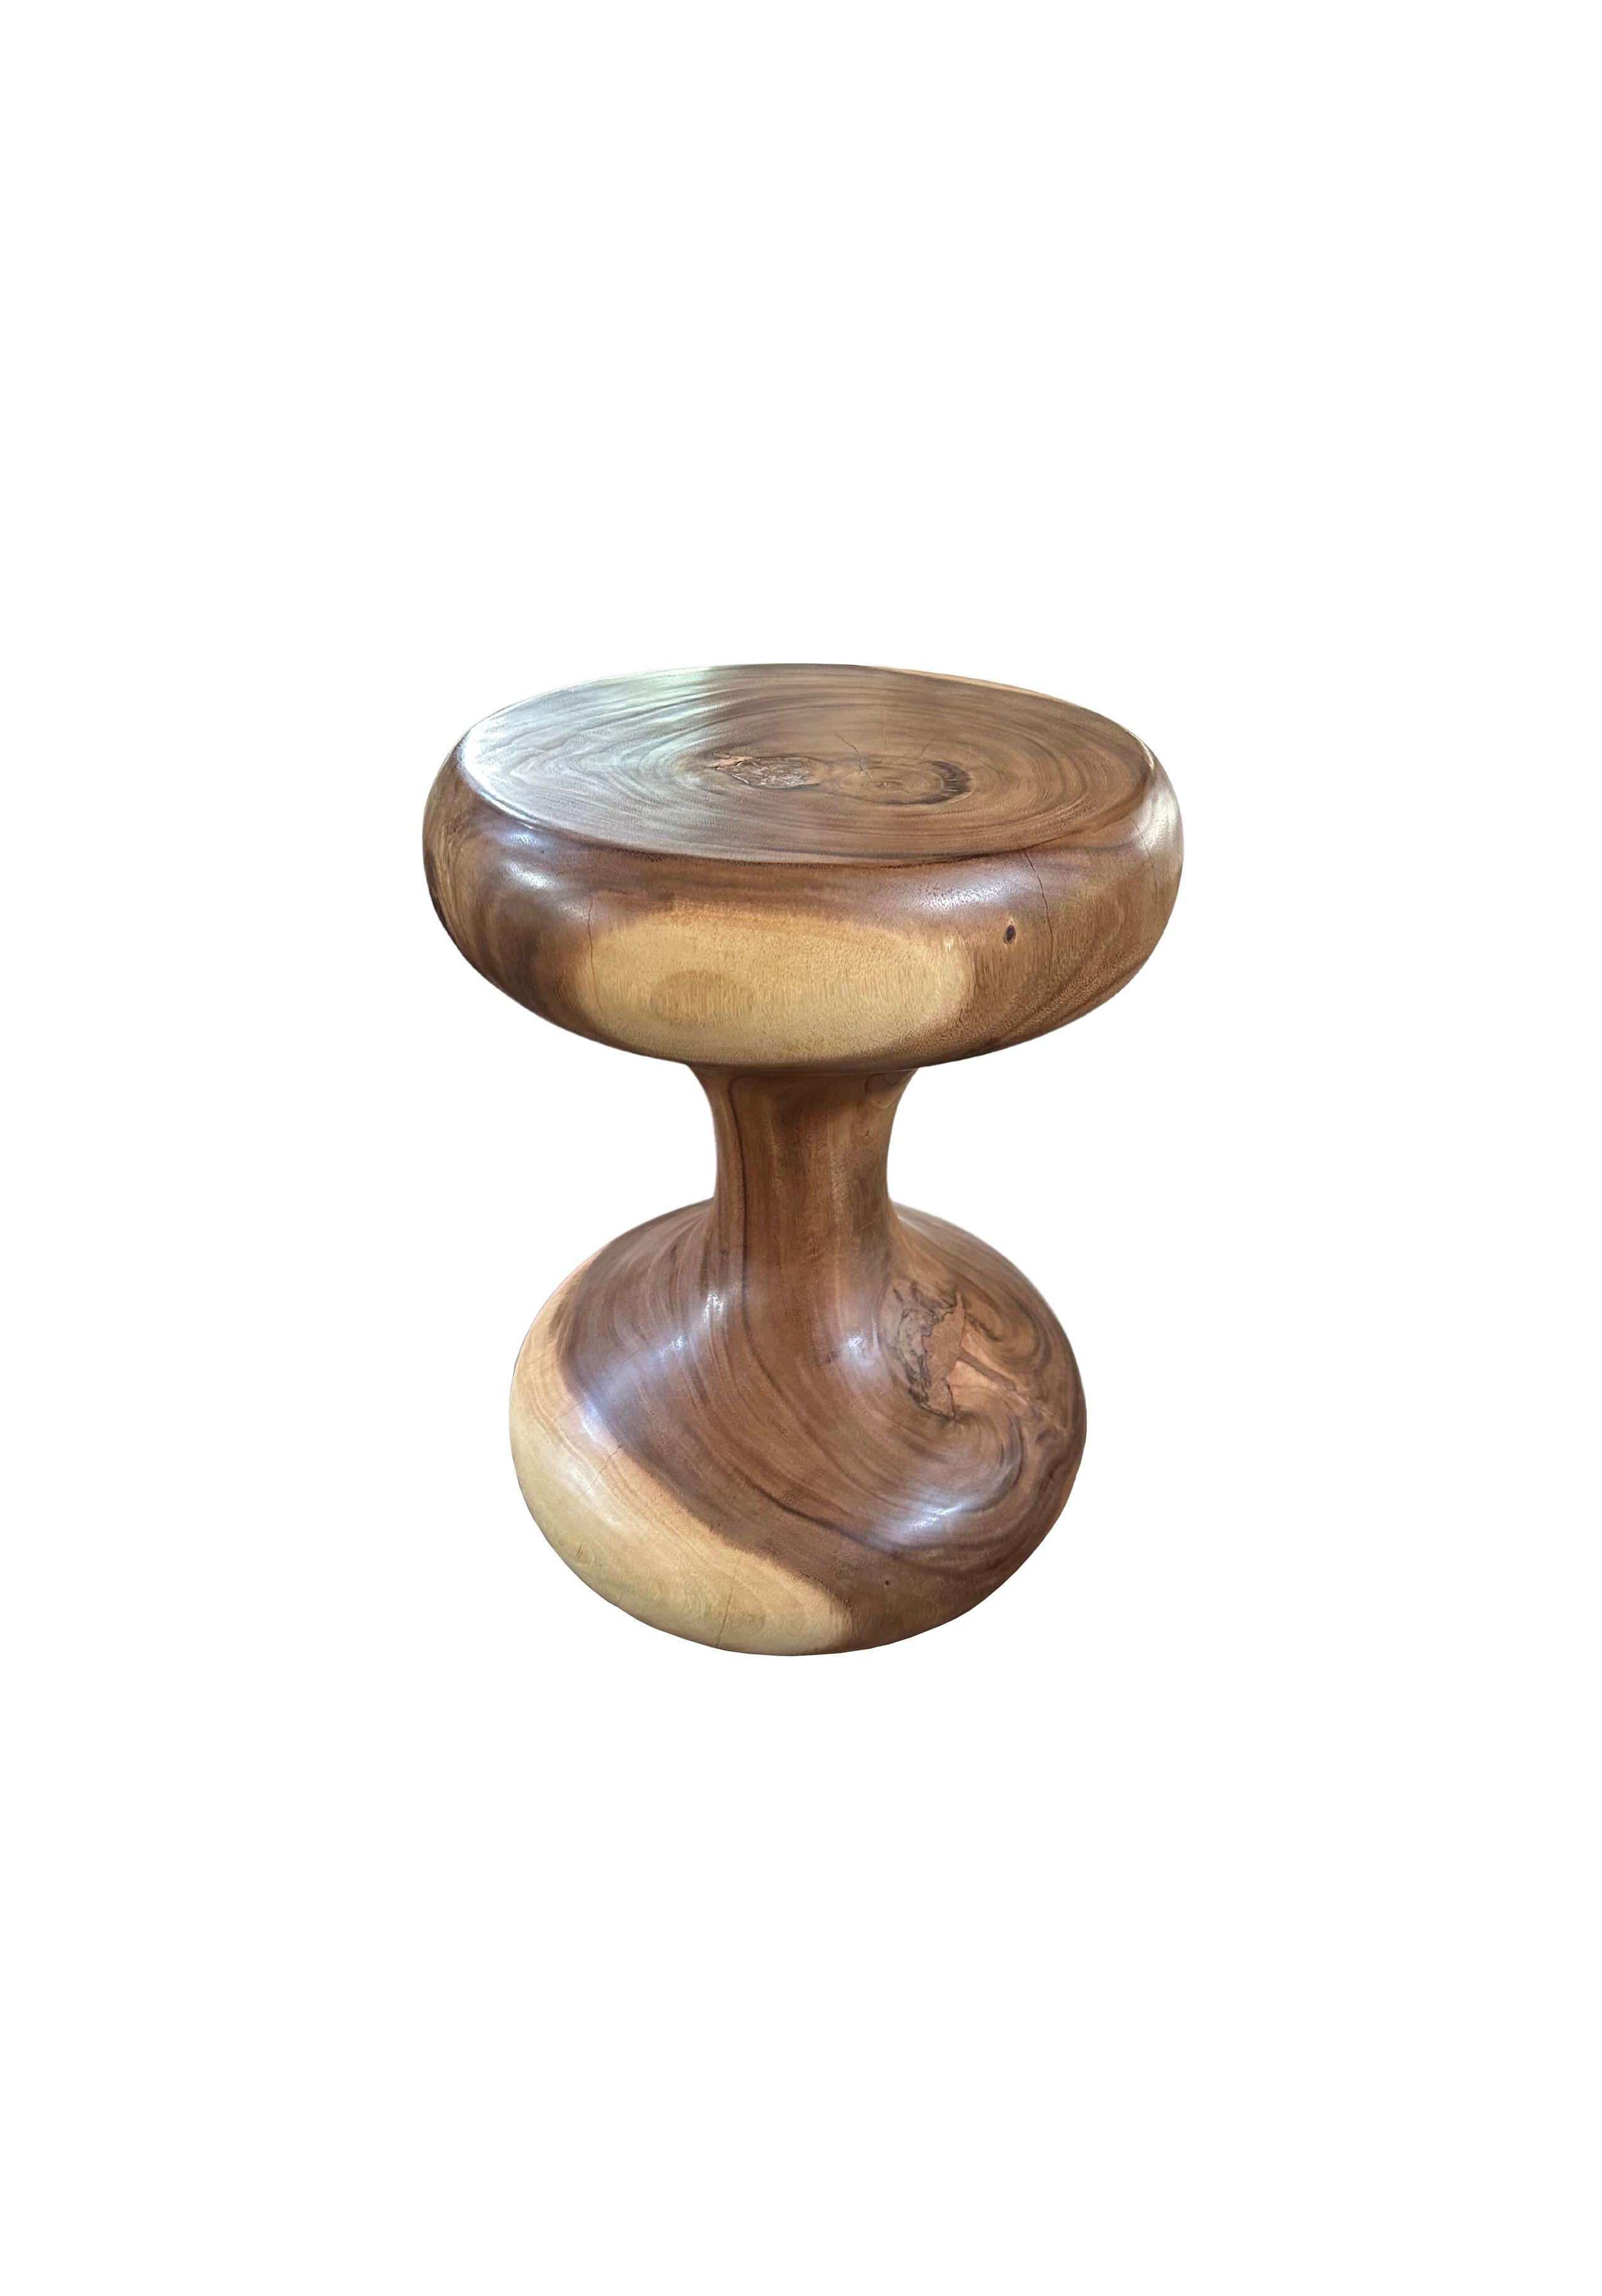 Indonesian Sculptural Suar Wood Side Table, with Stunning Wood Textures, Modern Organic For Sale